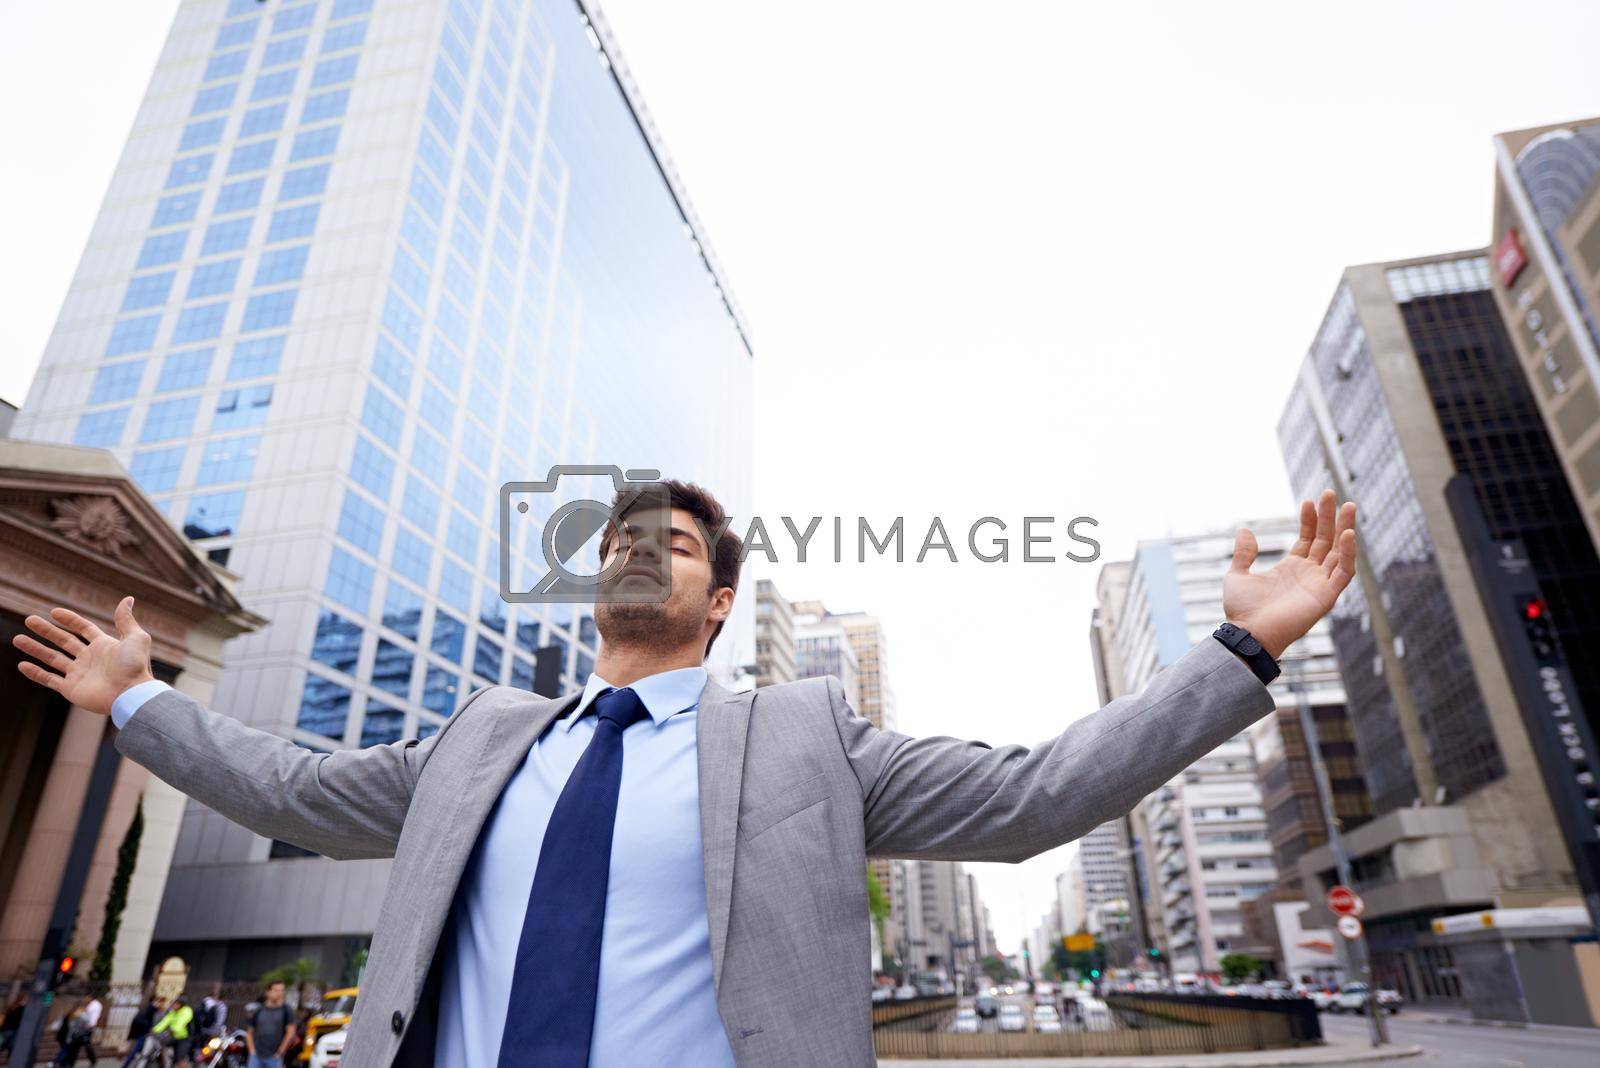 Royalty free image of Theres no place like the city. A contented young businessman standing in the city with his eyes closed and his arms raised. by YuriArcurs